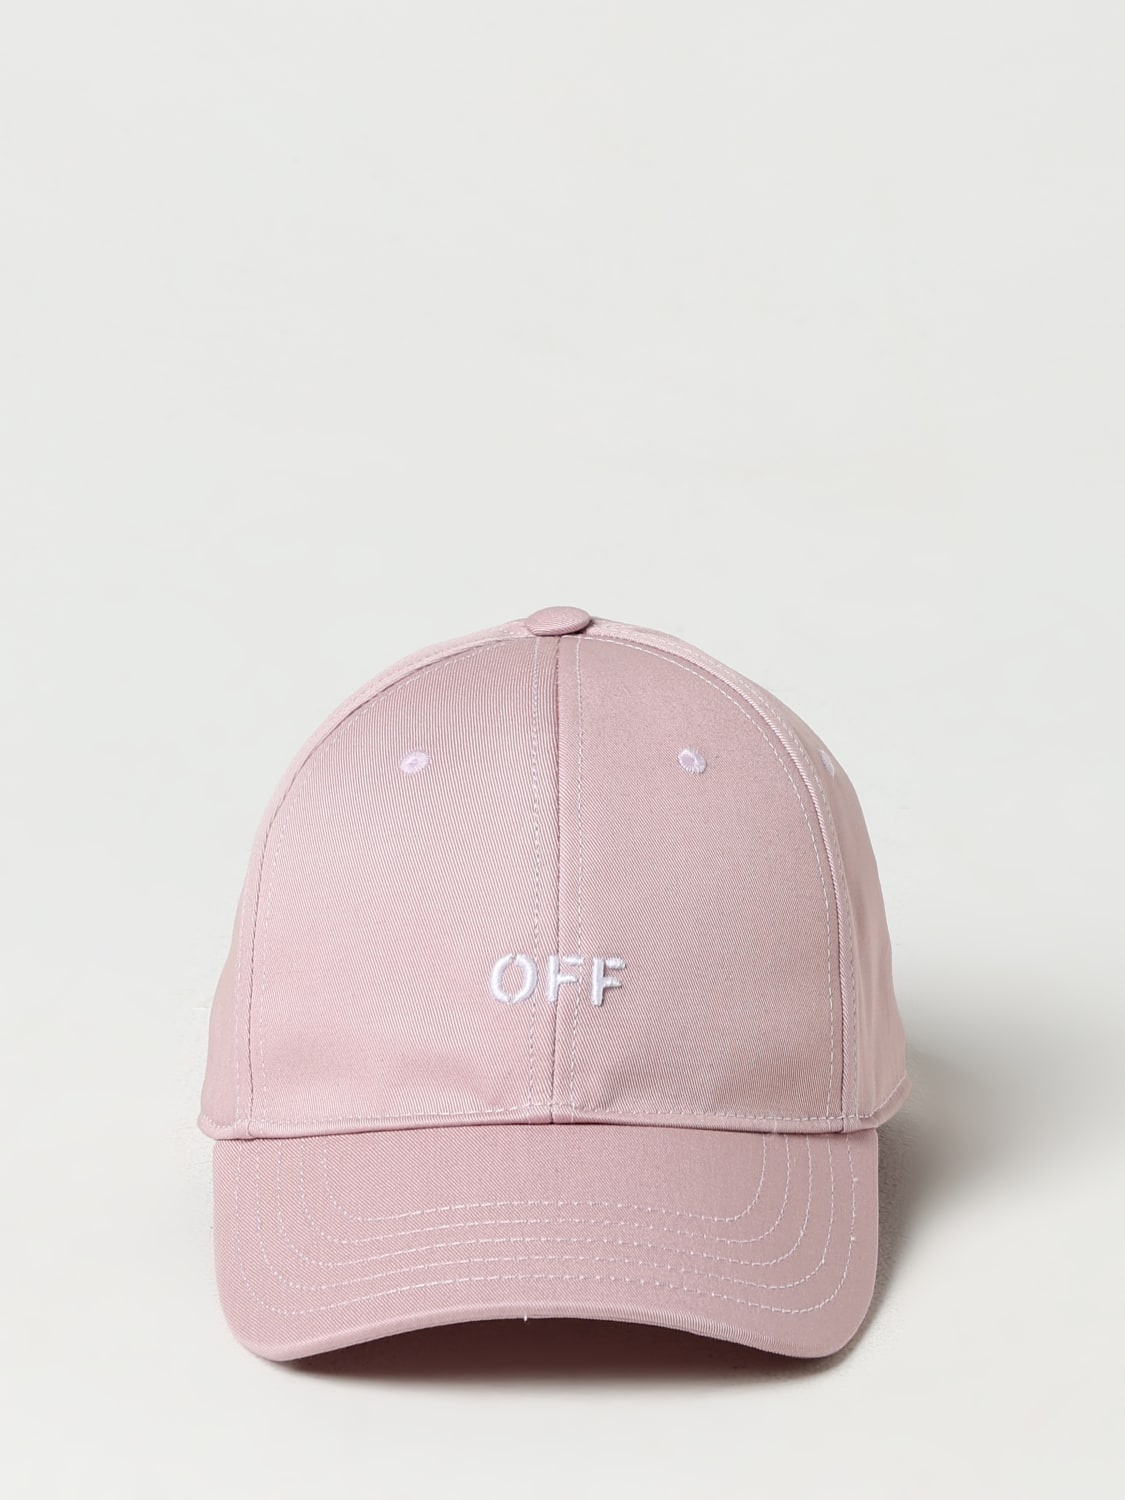 Hat woman Off-white - 3